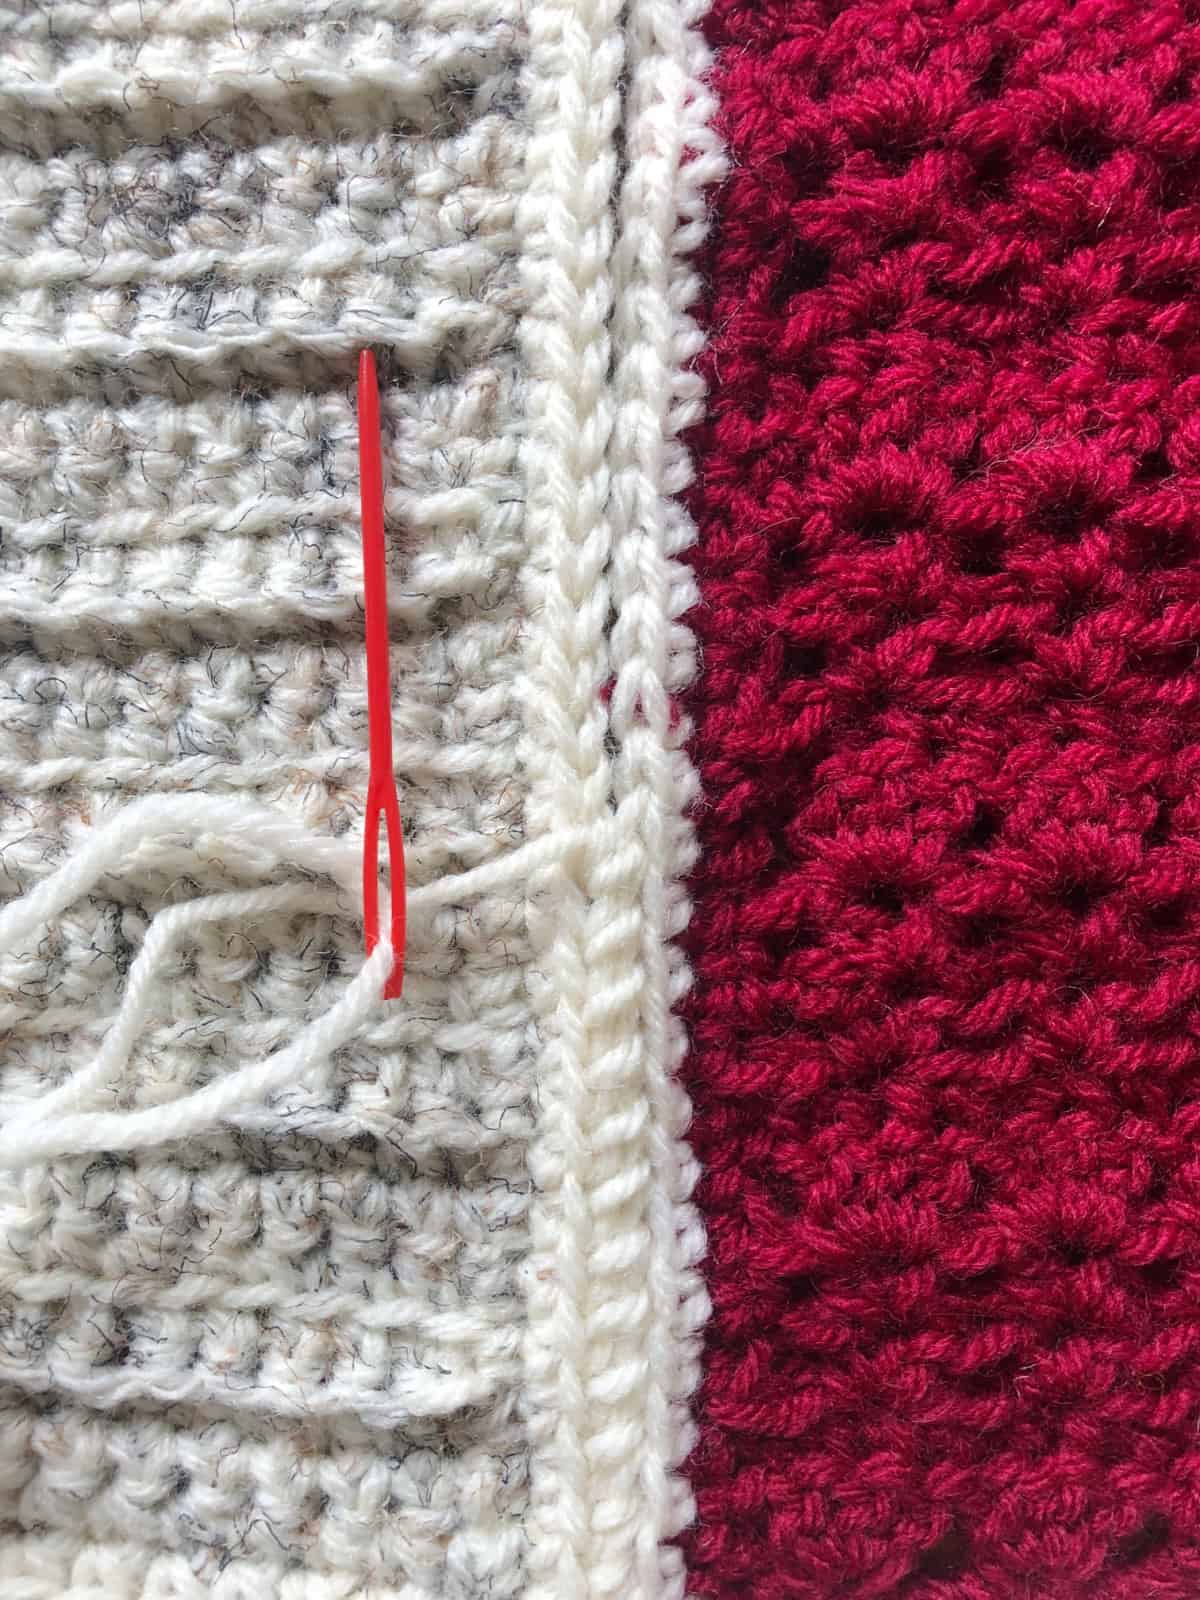 Whip stitches in white for red and white crochet squares.